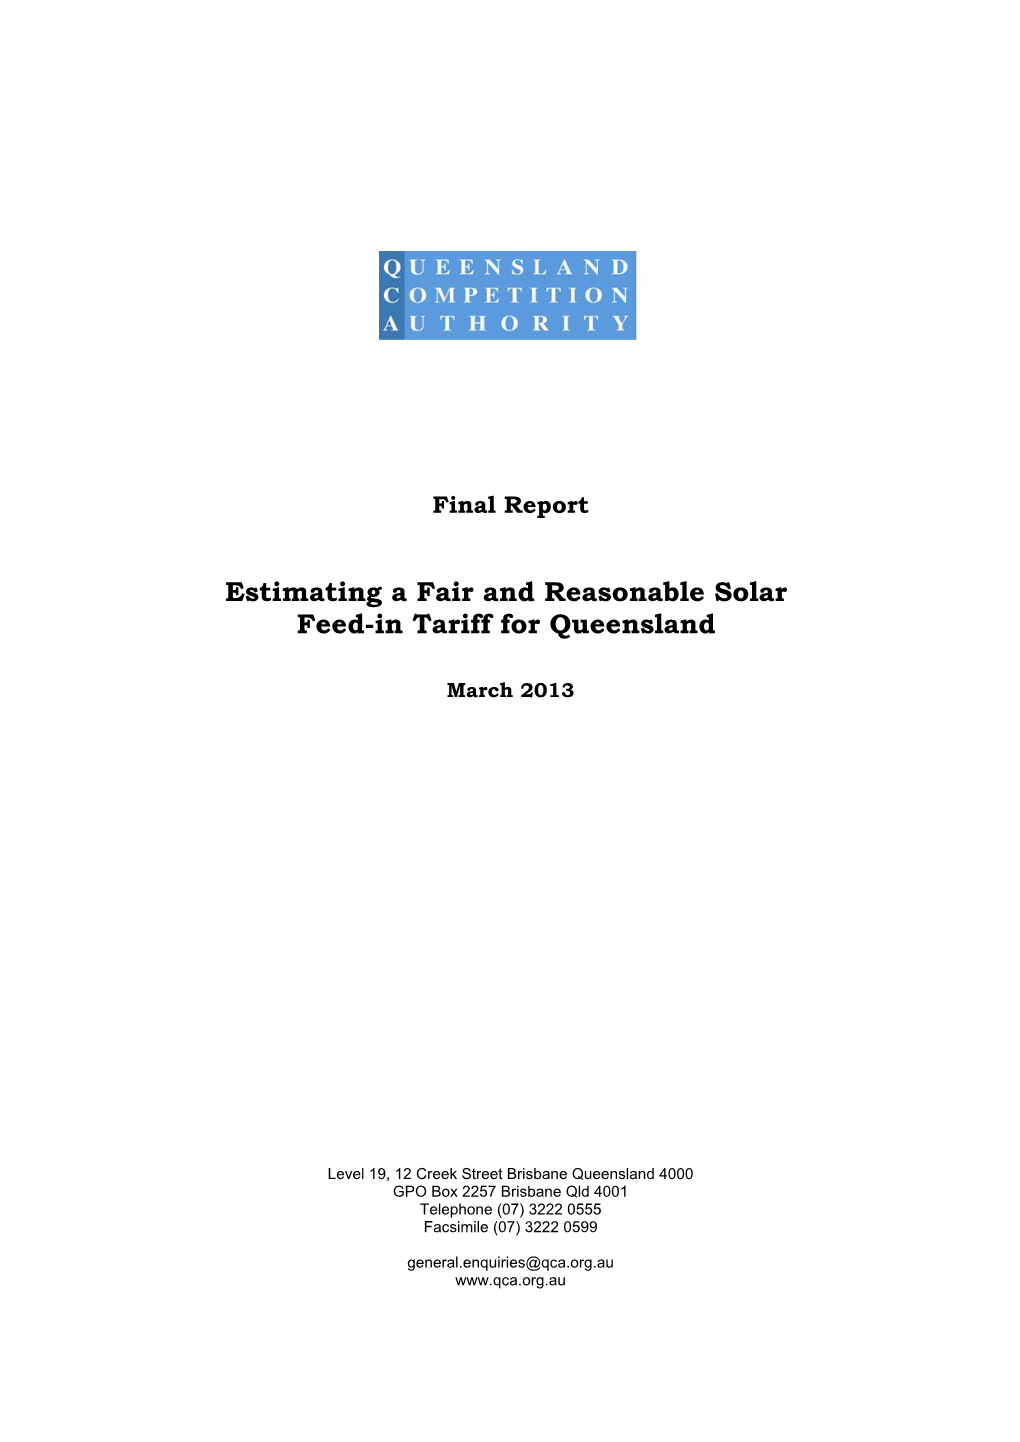 Estimating a Fair and Reasonable Solar Feed-In Tariff for Queensland